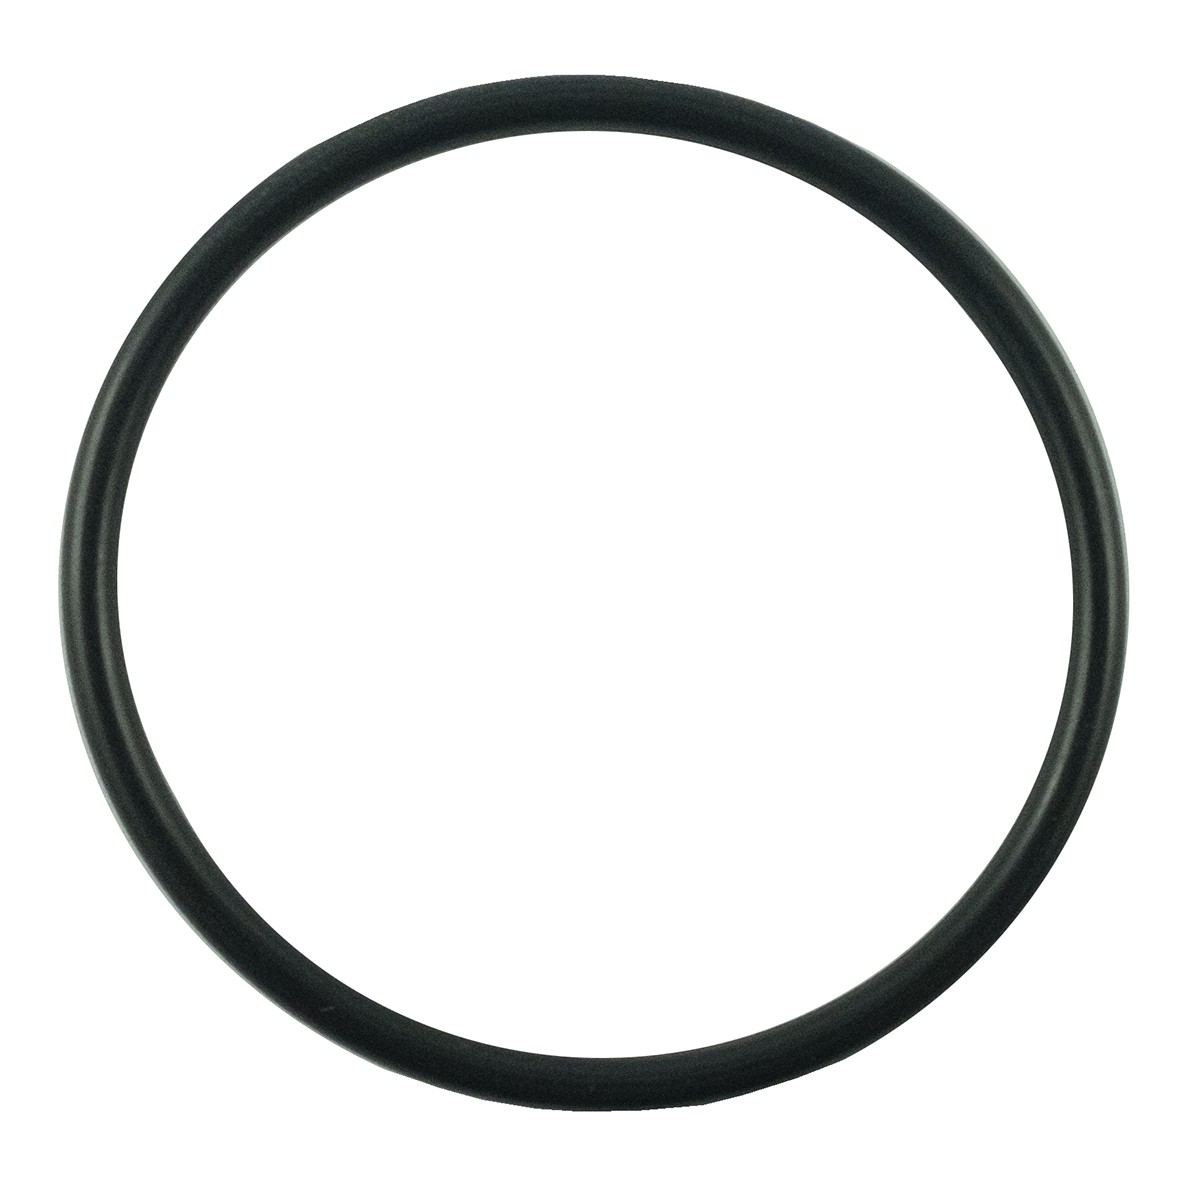 O-ring 44.60 x 2.60 mm / LS MT1.25 / AS568-132 / TRG270 / 40356226